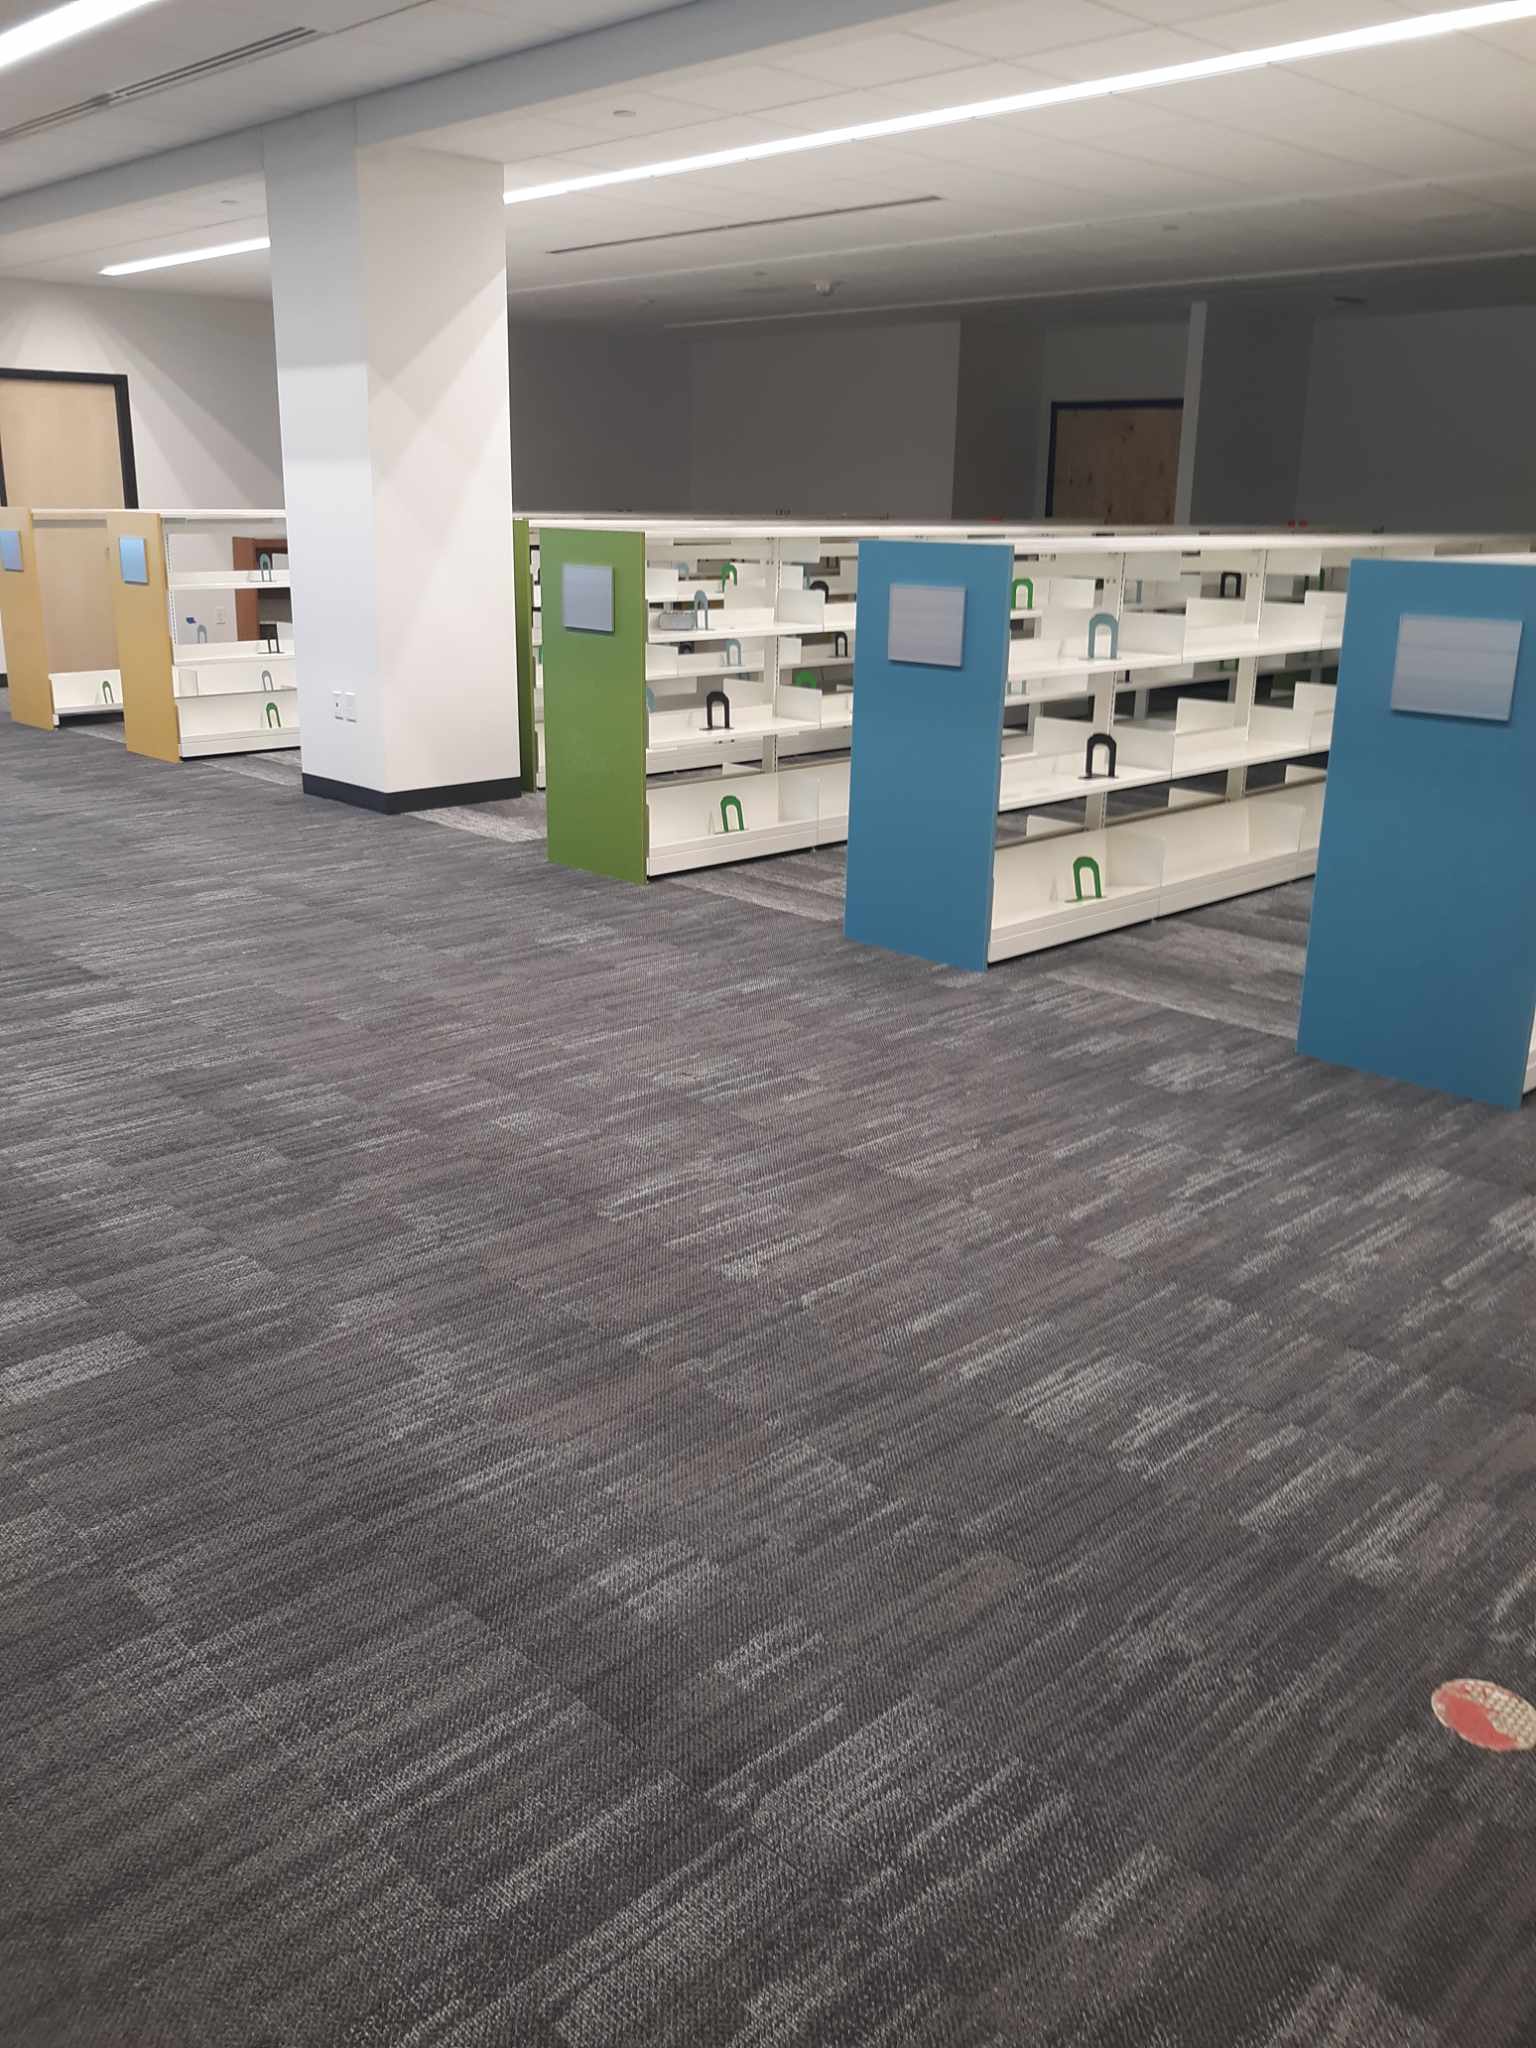 Empty shelves in the new Children’s Services department ready for material.